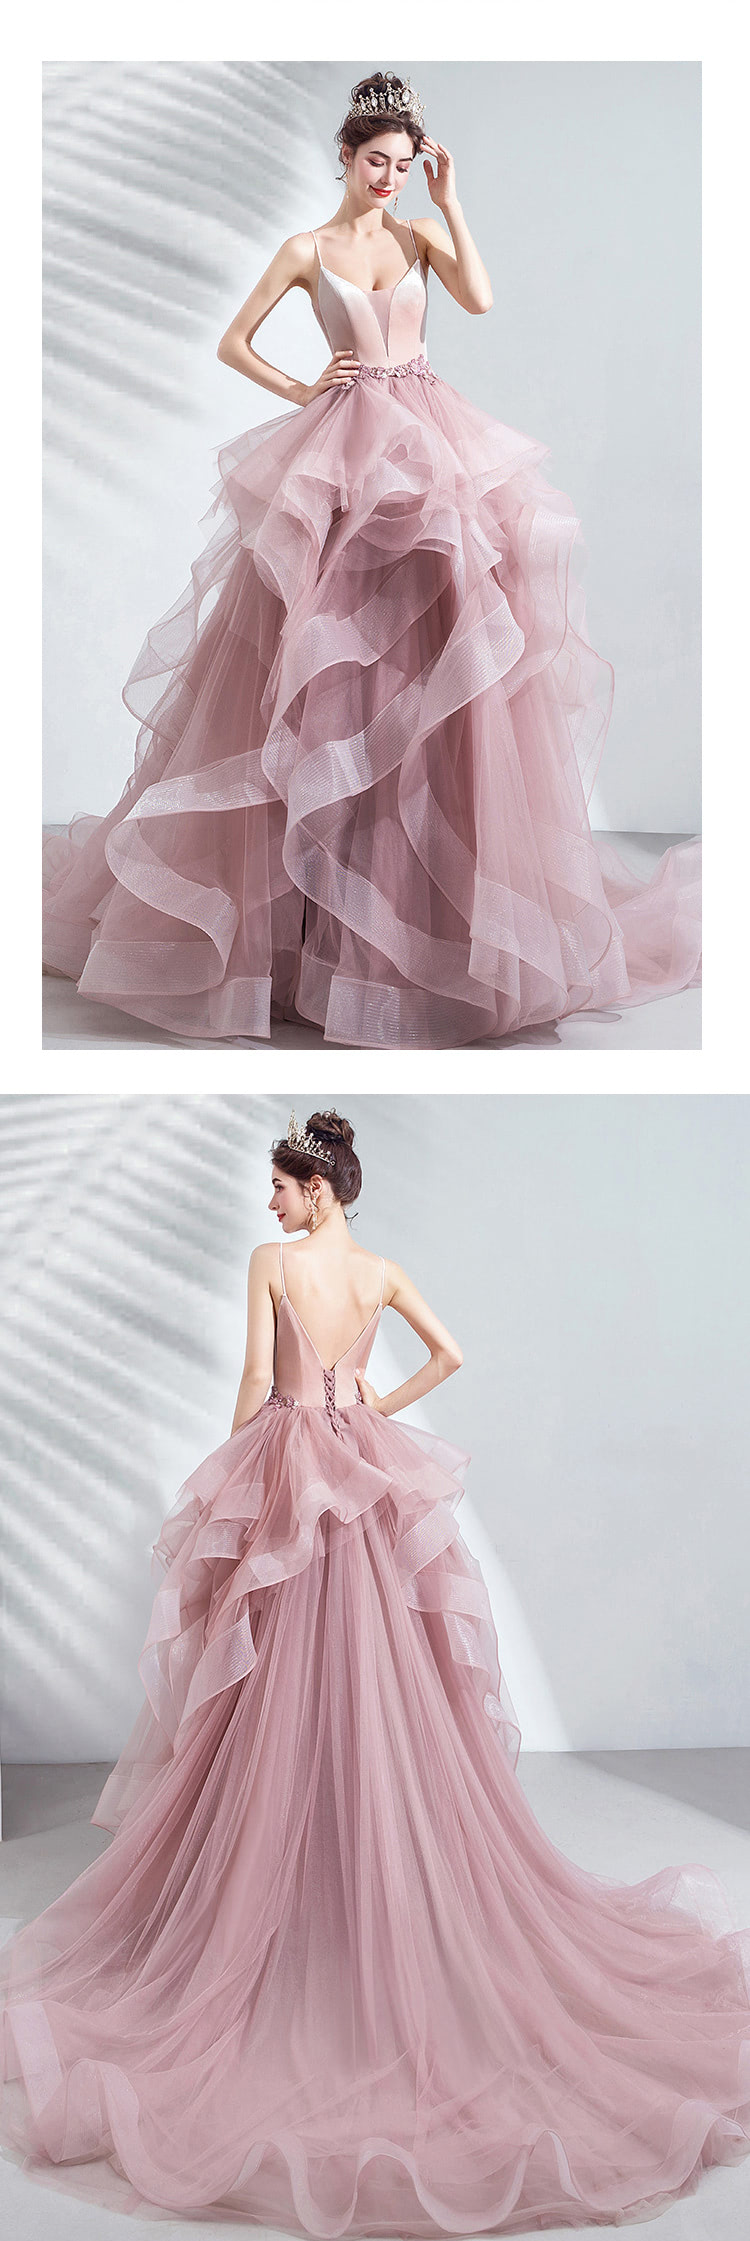 Pink-Layered-Tulle-Banquet-Prom-Party-Evening-Pompon-Skirt-Dress15